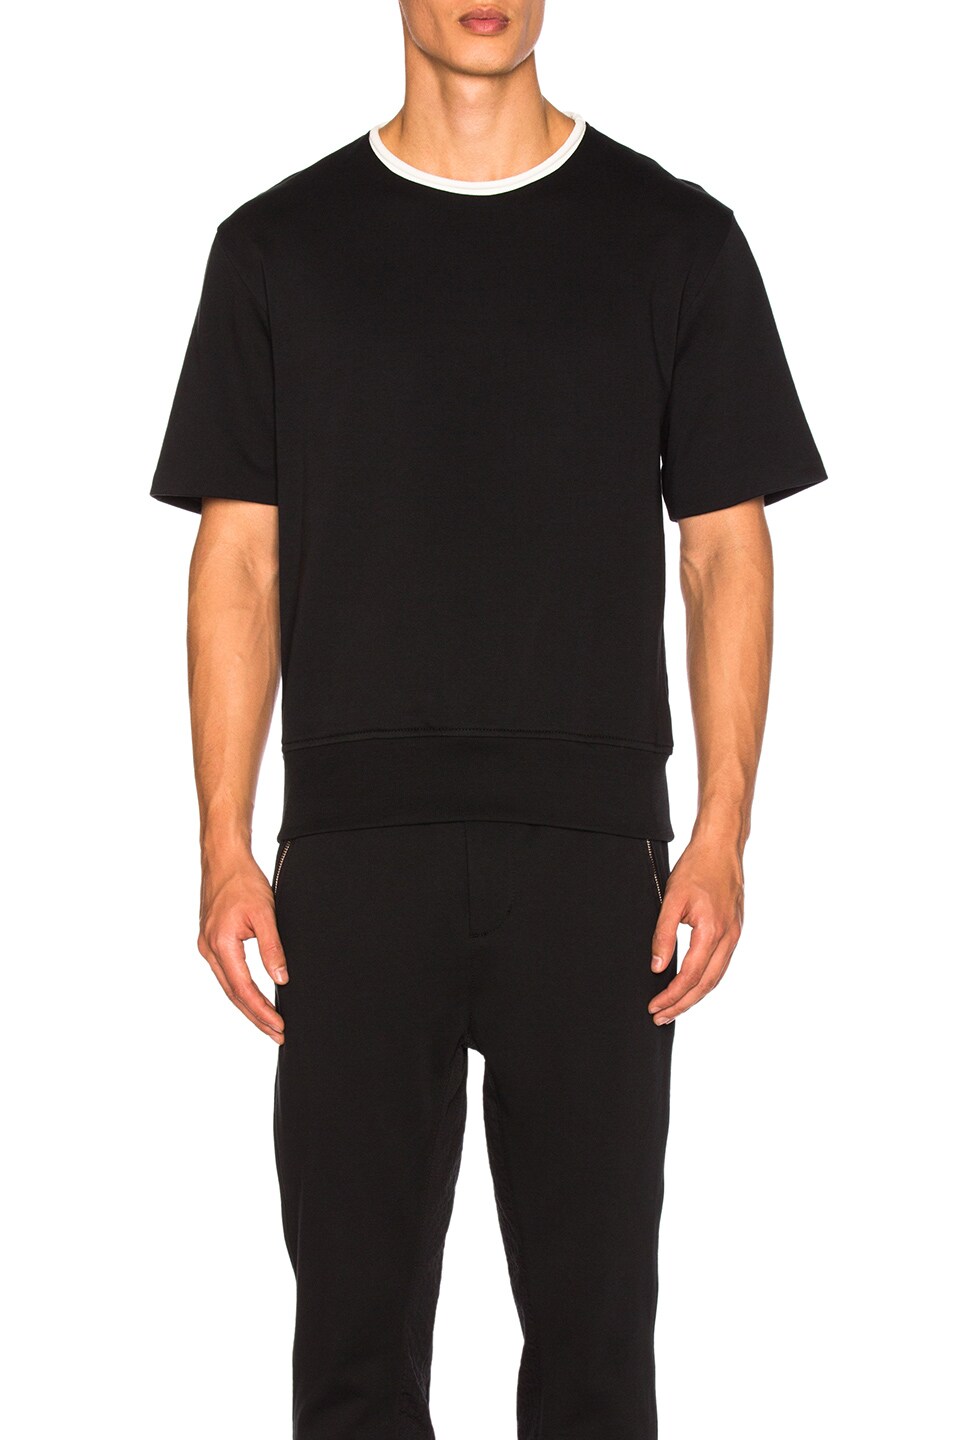 Image 1 of 3.1 phillip lim Wide Rib French Terry Short Sleeve Shirt in Soft Black